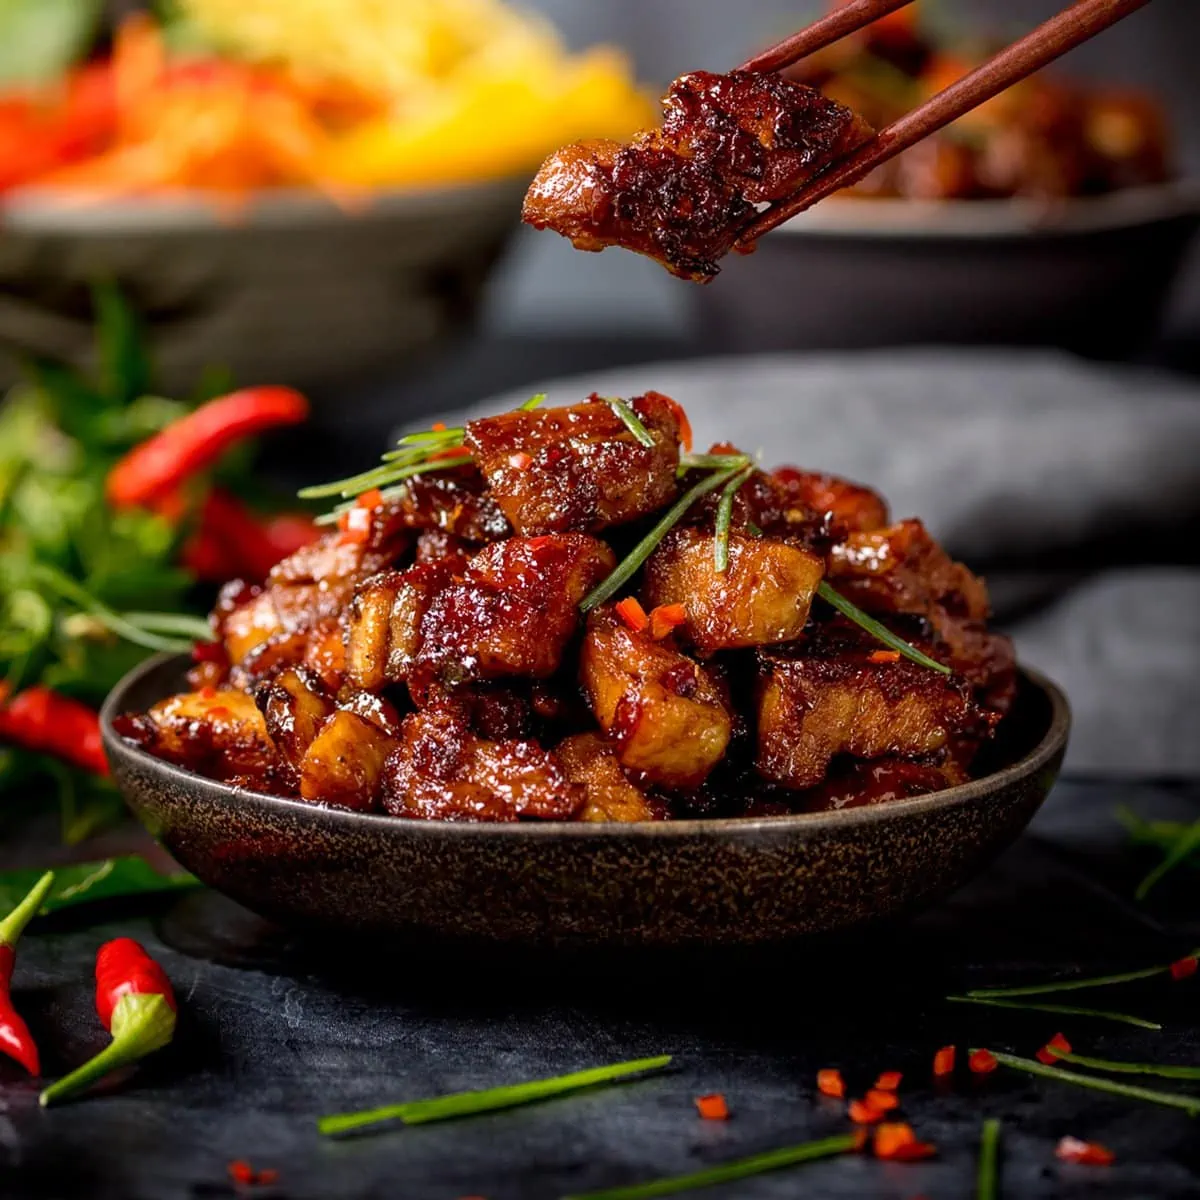 Close up image of bowl of Chinese sticky pork belly pieces. A piece is being taken from the bowl using a pair of chopsticks.